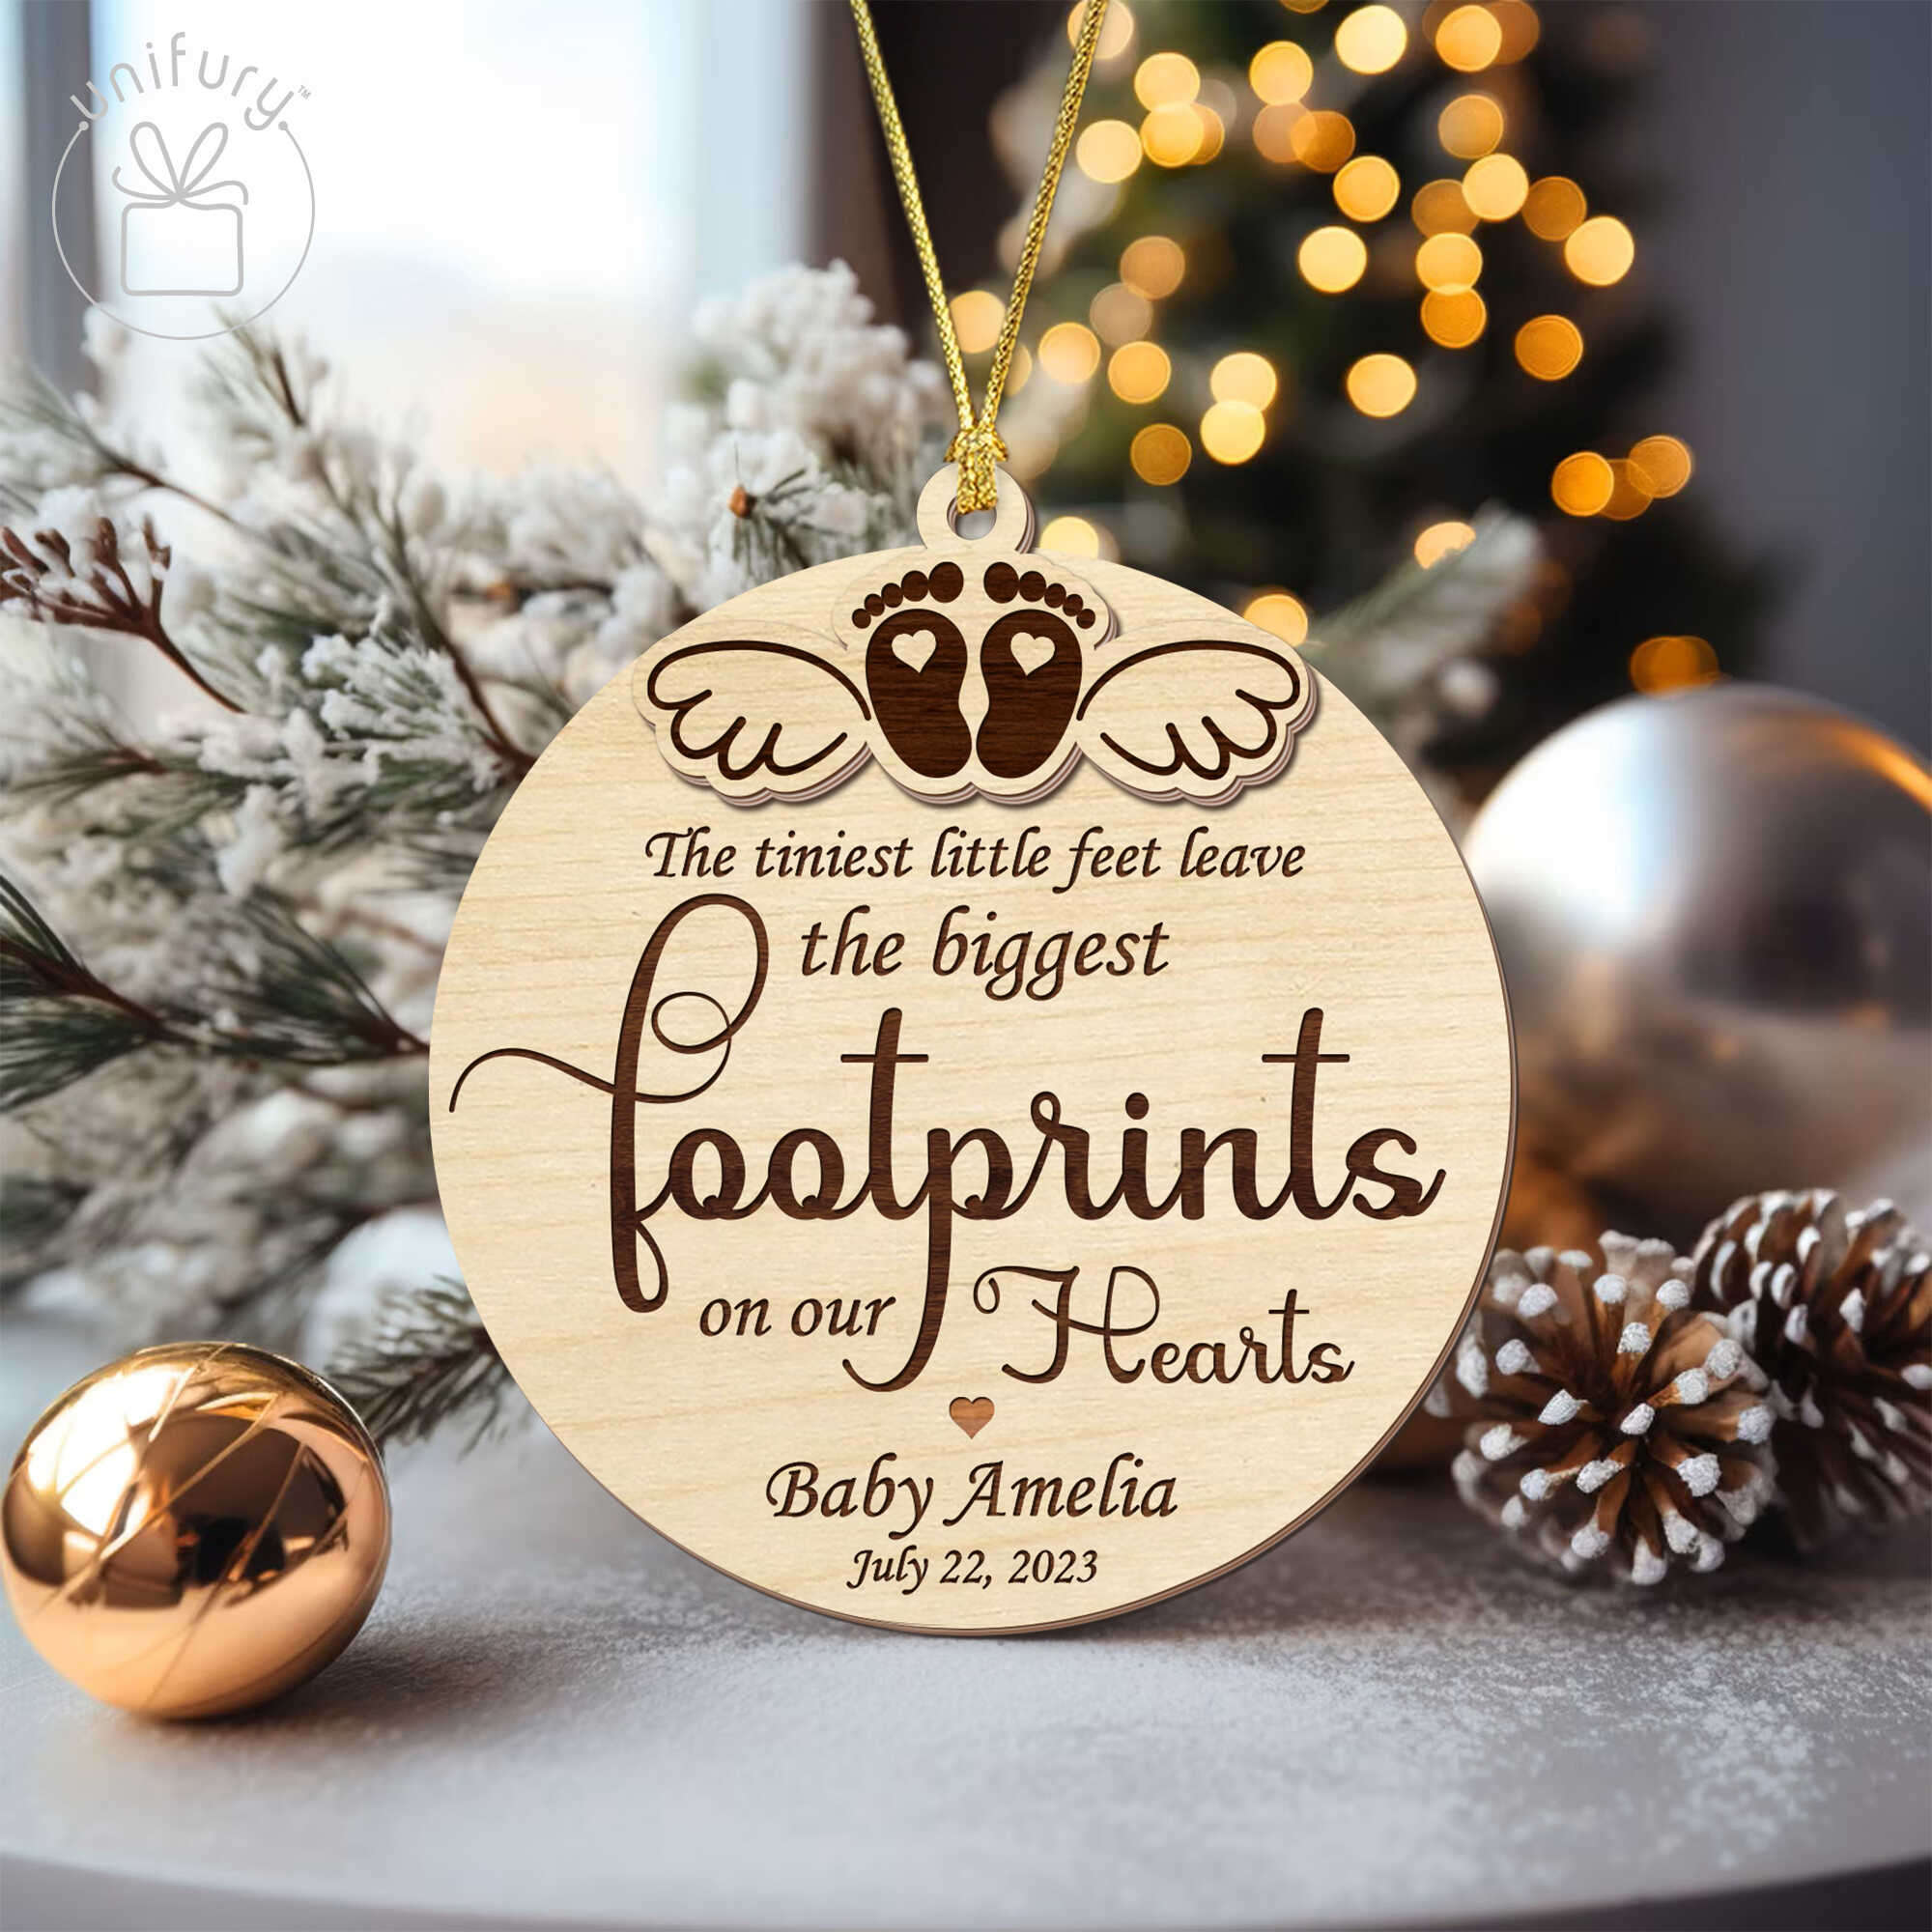 Personalized Wooden Ornaments